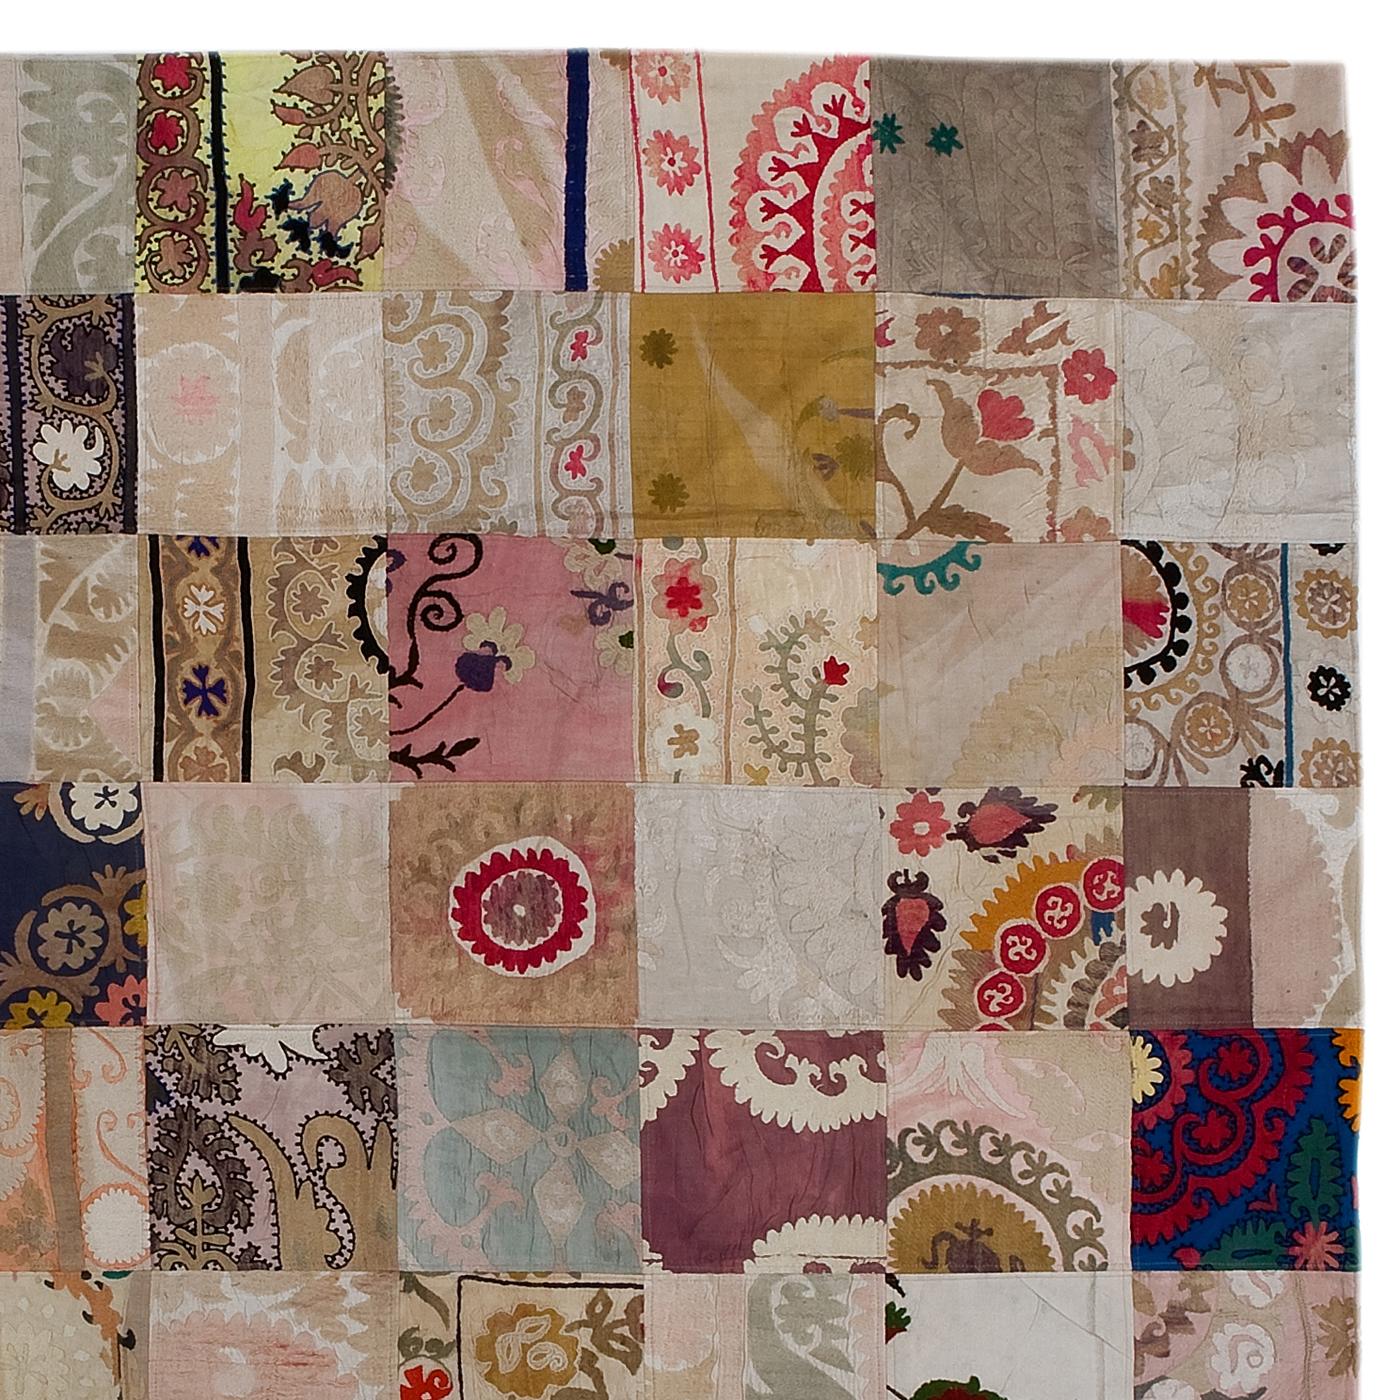 Created with the patchwork technique, this carpet is a one-of-a-kind floor decoration that will make a statement in any decor. It is made entirely by hand and combines pieces of different vintage rugs made in different periods using a variety of